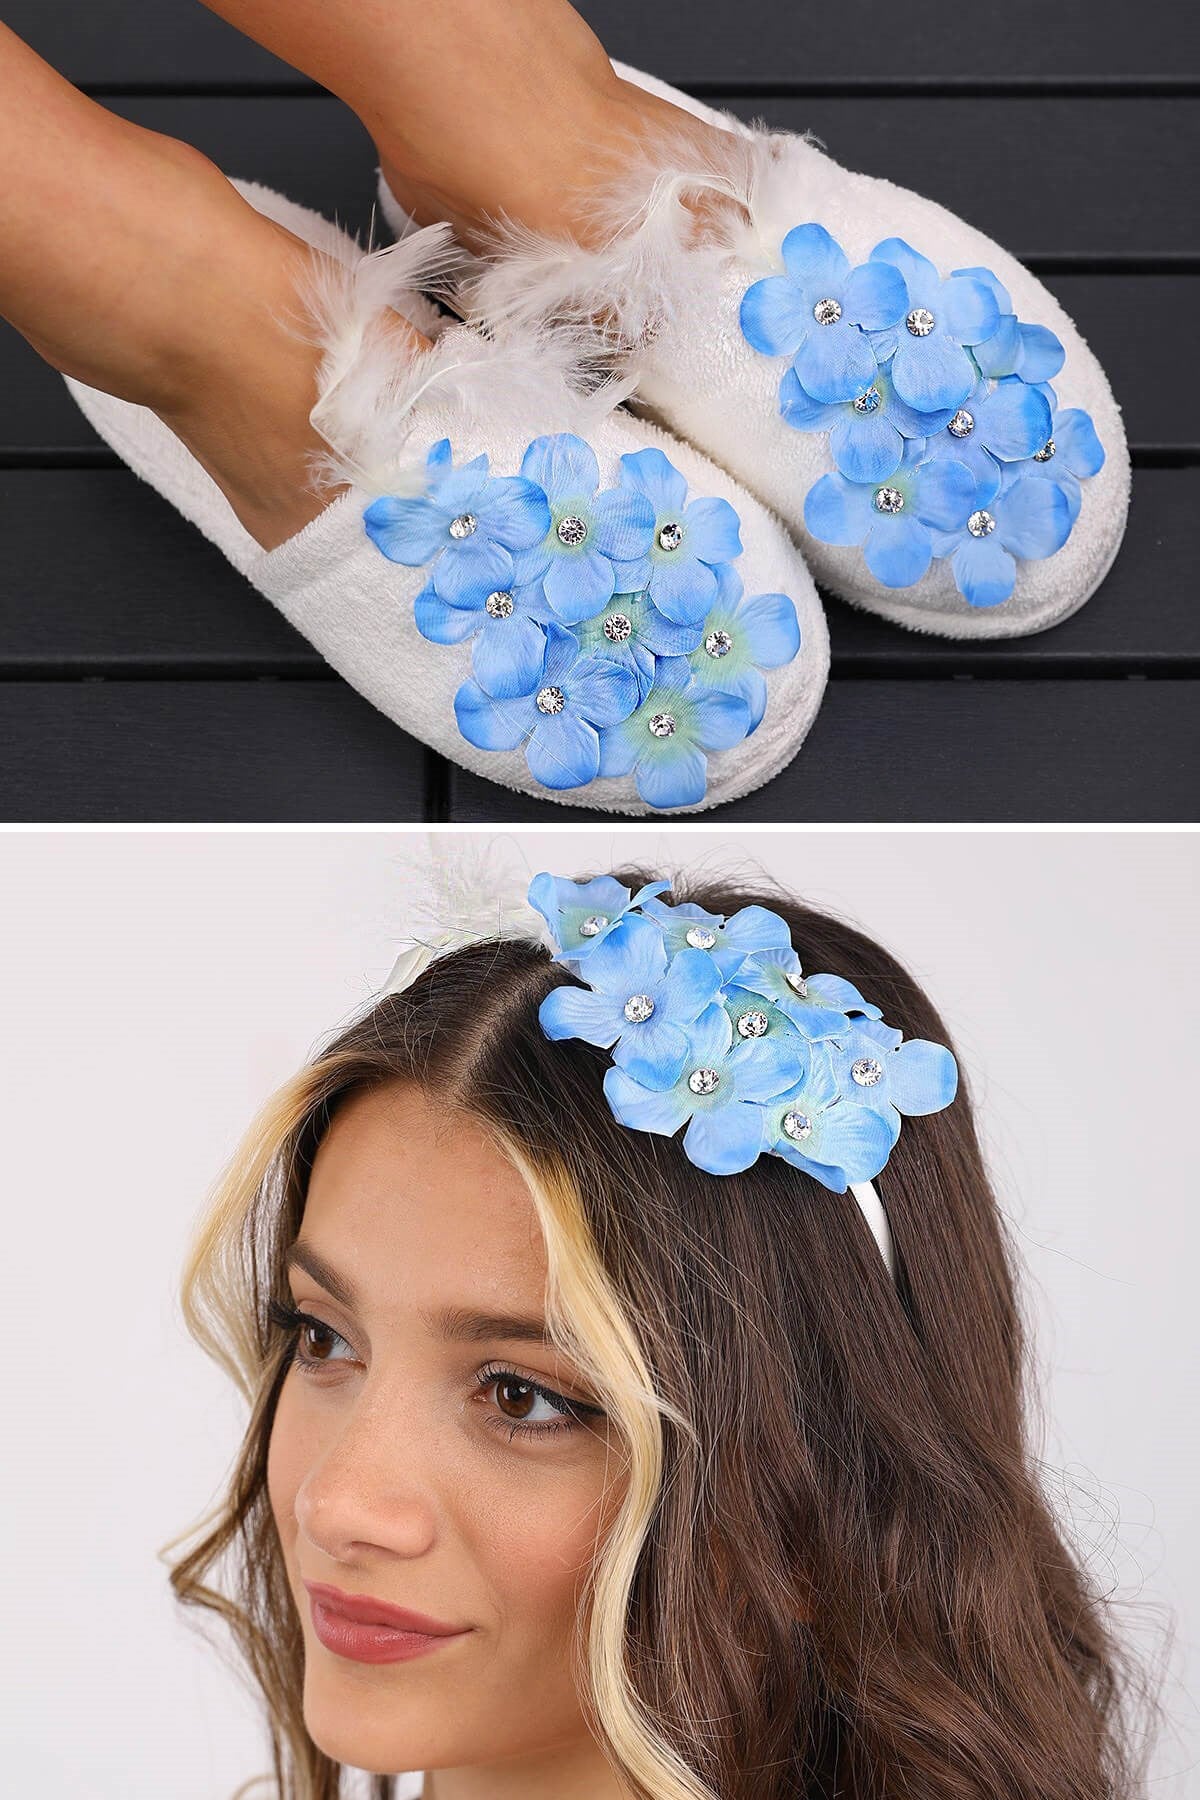 Shopymommy 757103 Violet Flowered Maternity Crown & Maternity Slippers Set Blue